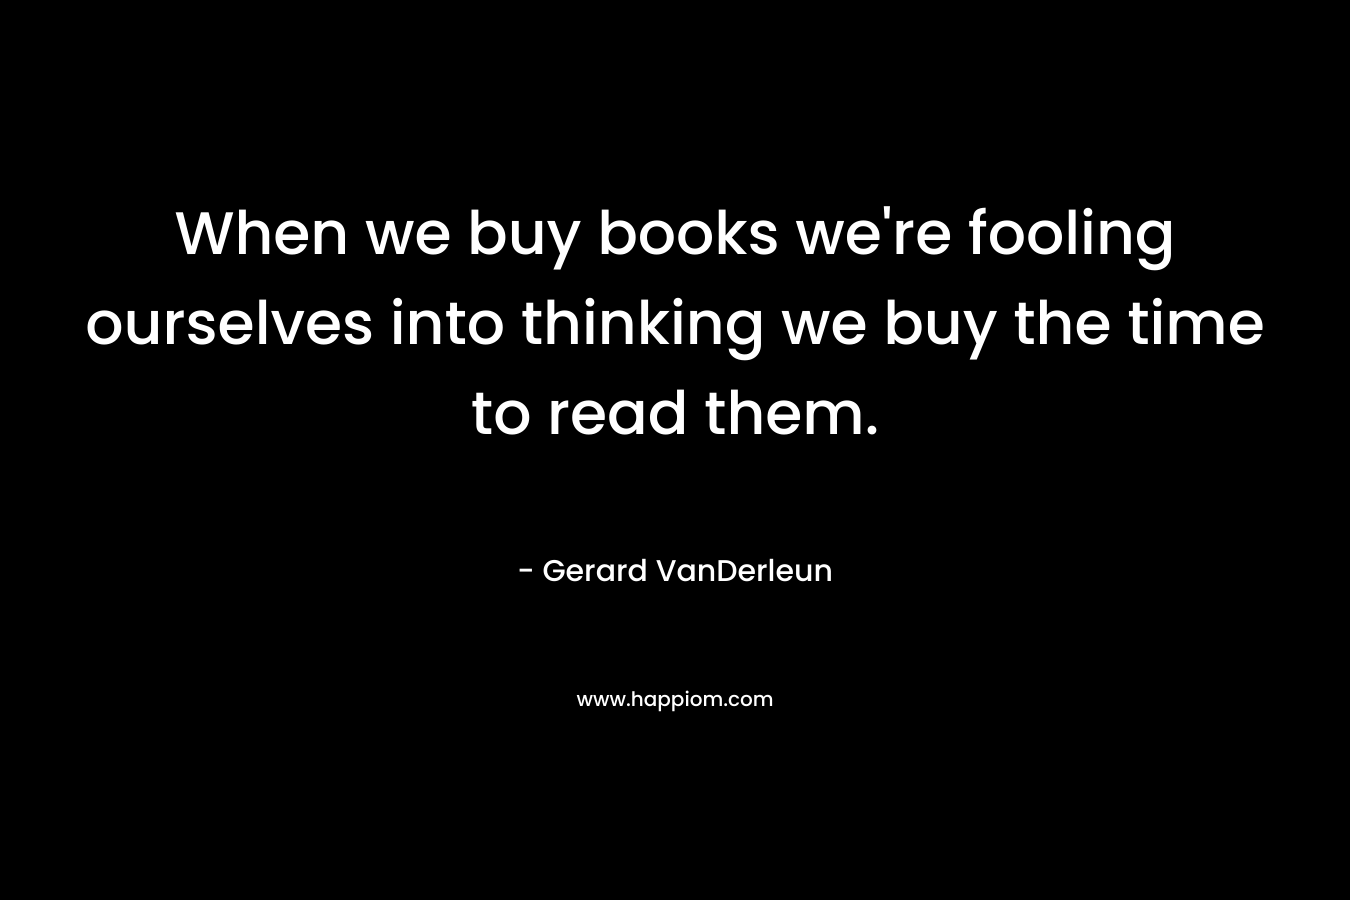 When we buy books we’re fooling ourselves into thinking we buy the time to read them. – Gerard VanDerleun